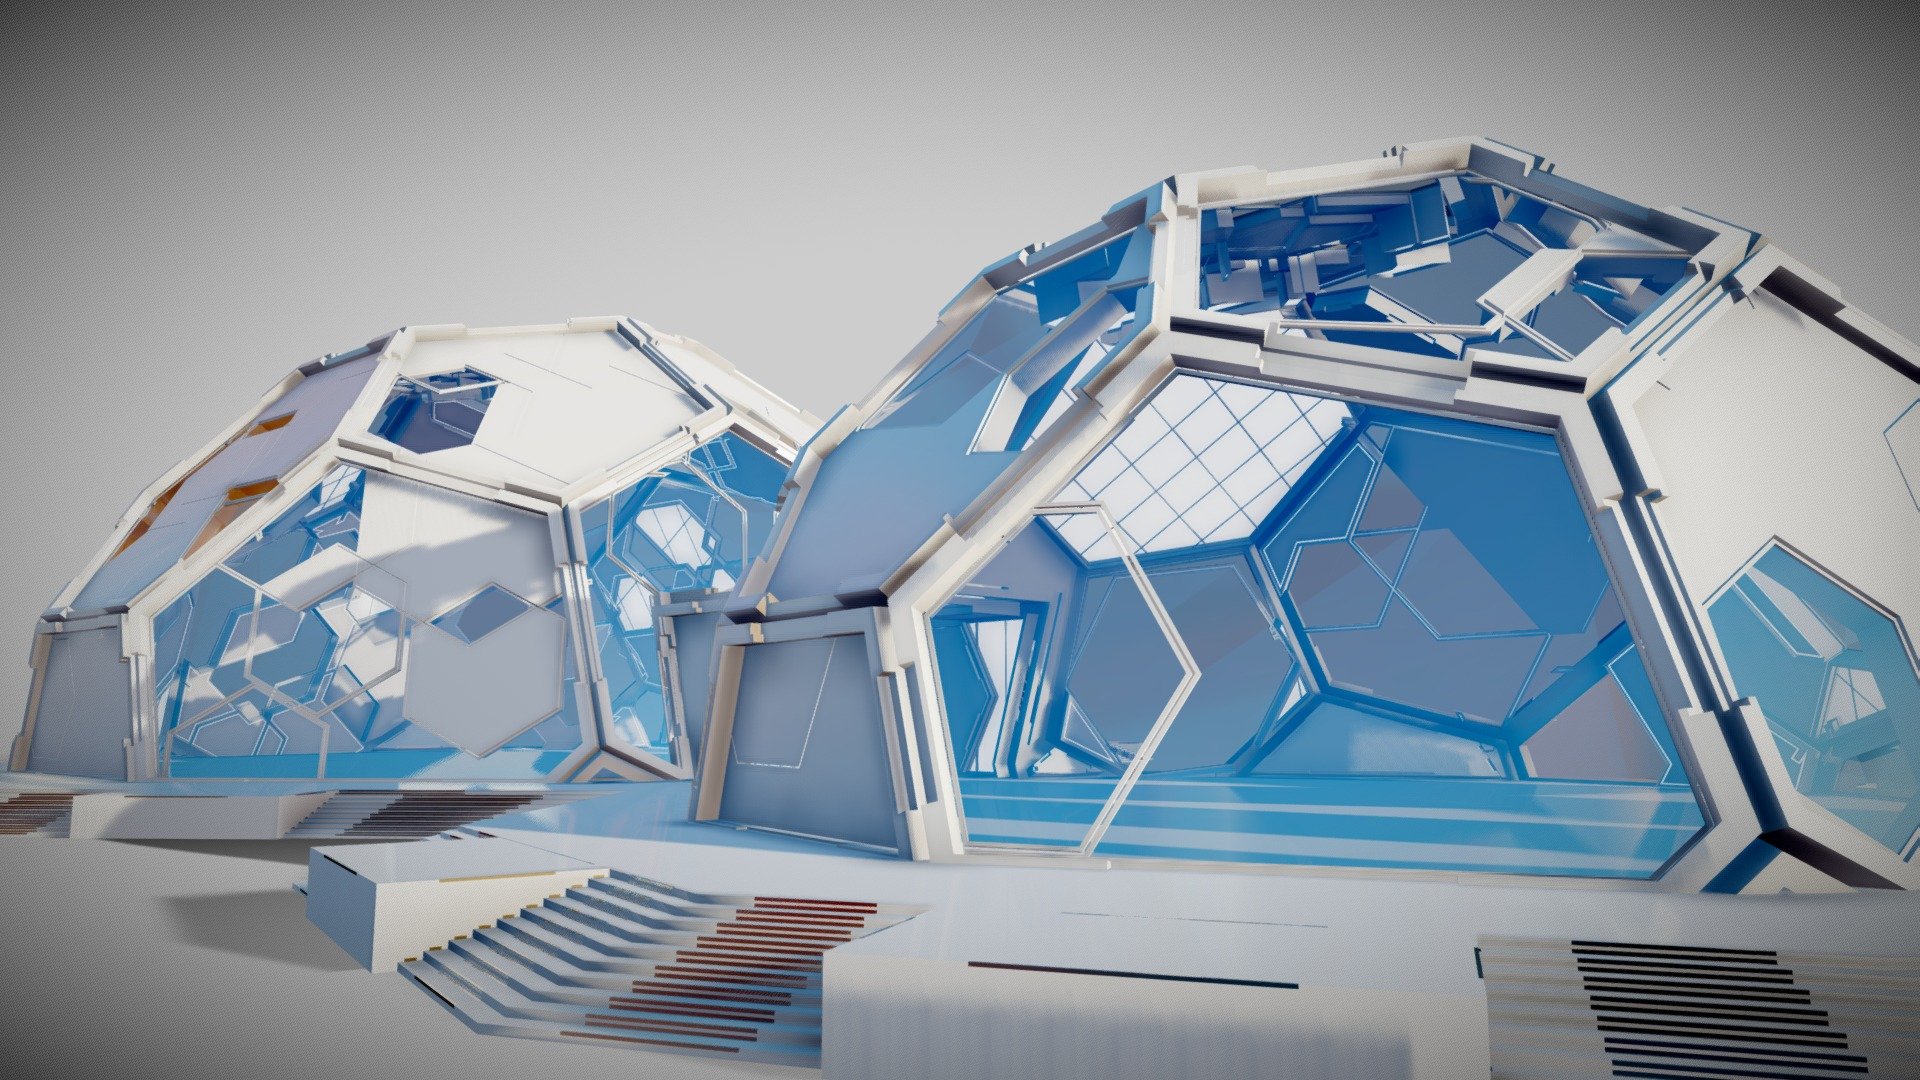 Detailed futuristic interior scene.
Low poly and sutitable for real-time applications 3d model